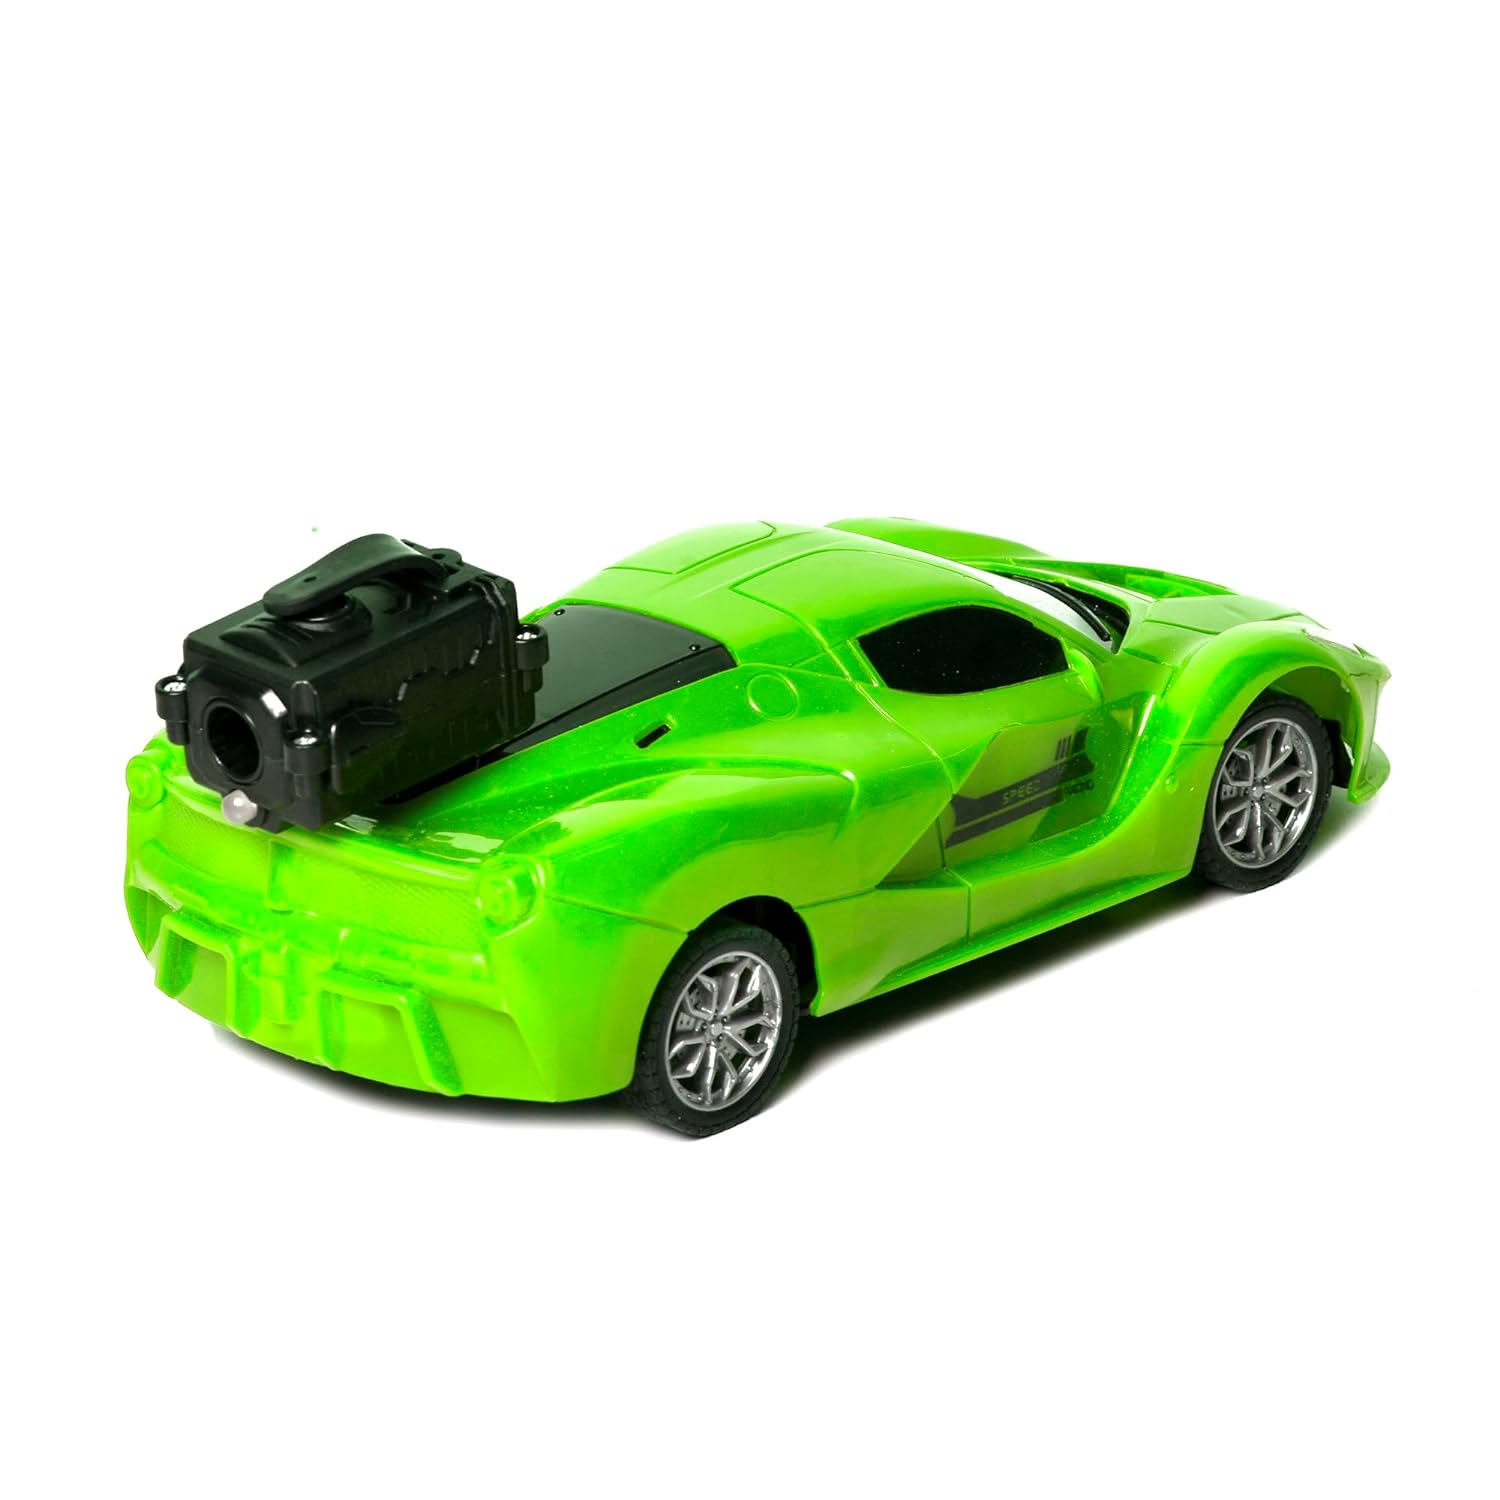 Braintastic Model Diecast Car Toy Vehicle Pull Back Friction Car with Openable Doors Light & Music Toys for Kids Age 3+ Years (Spray Car Green)